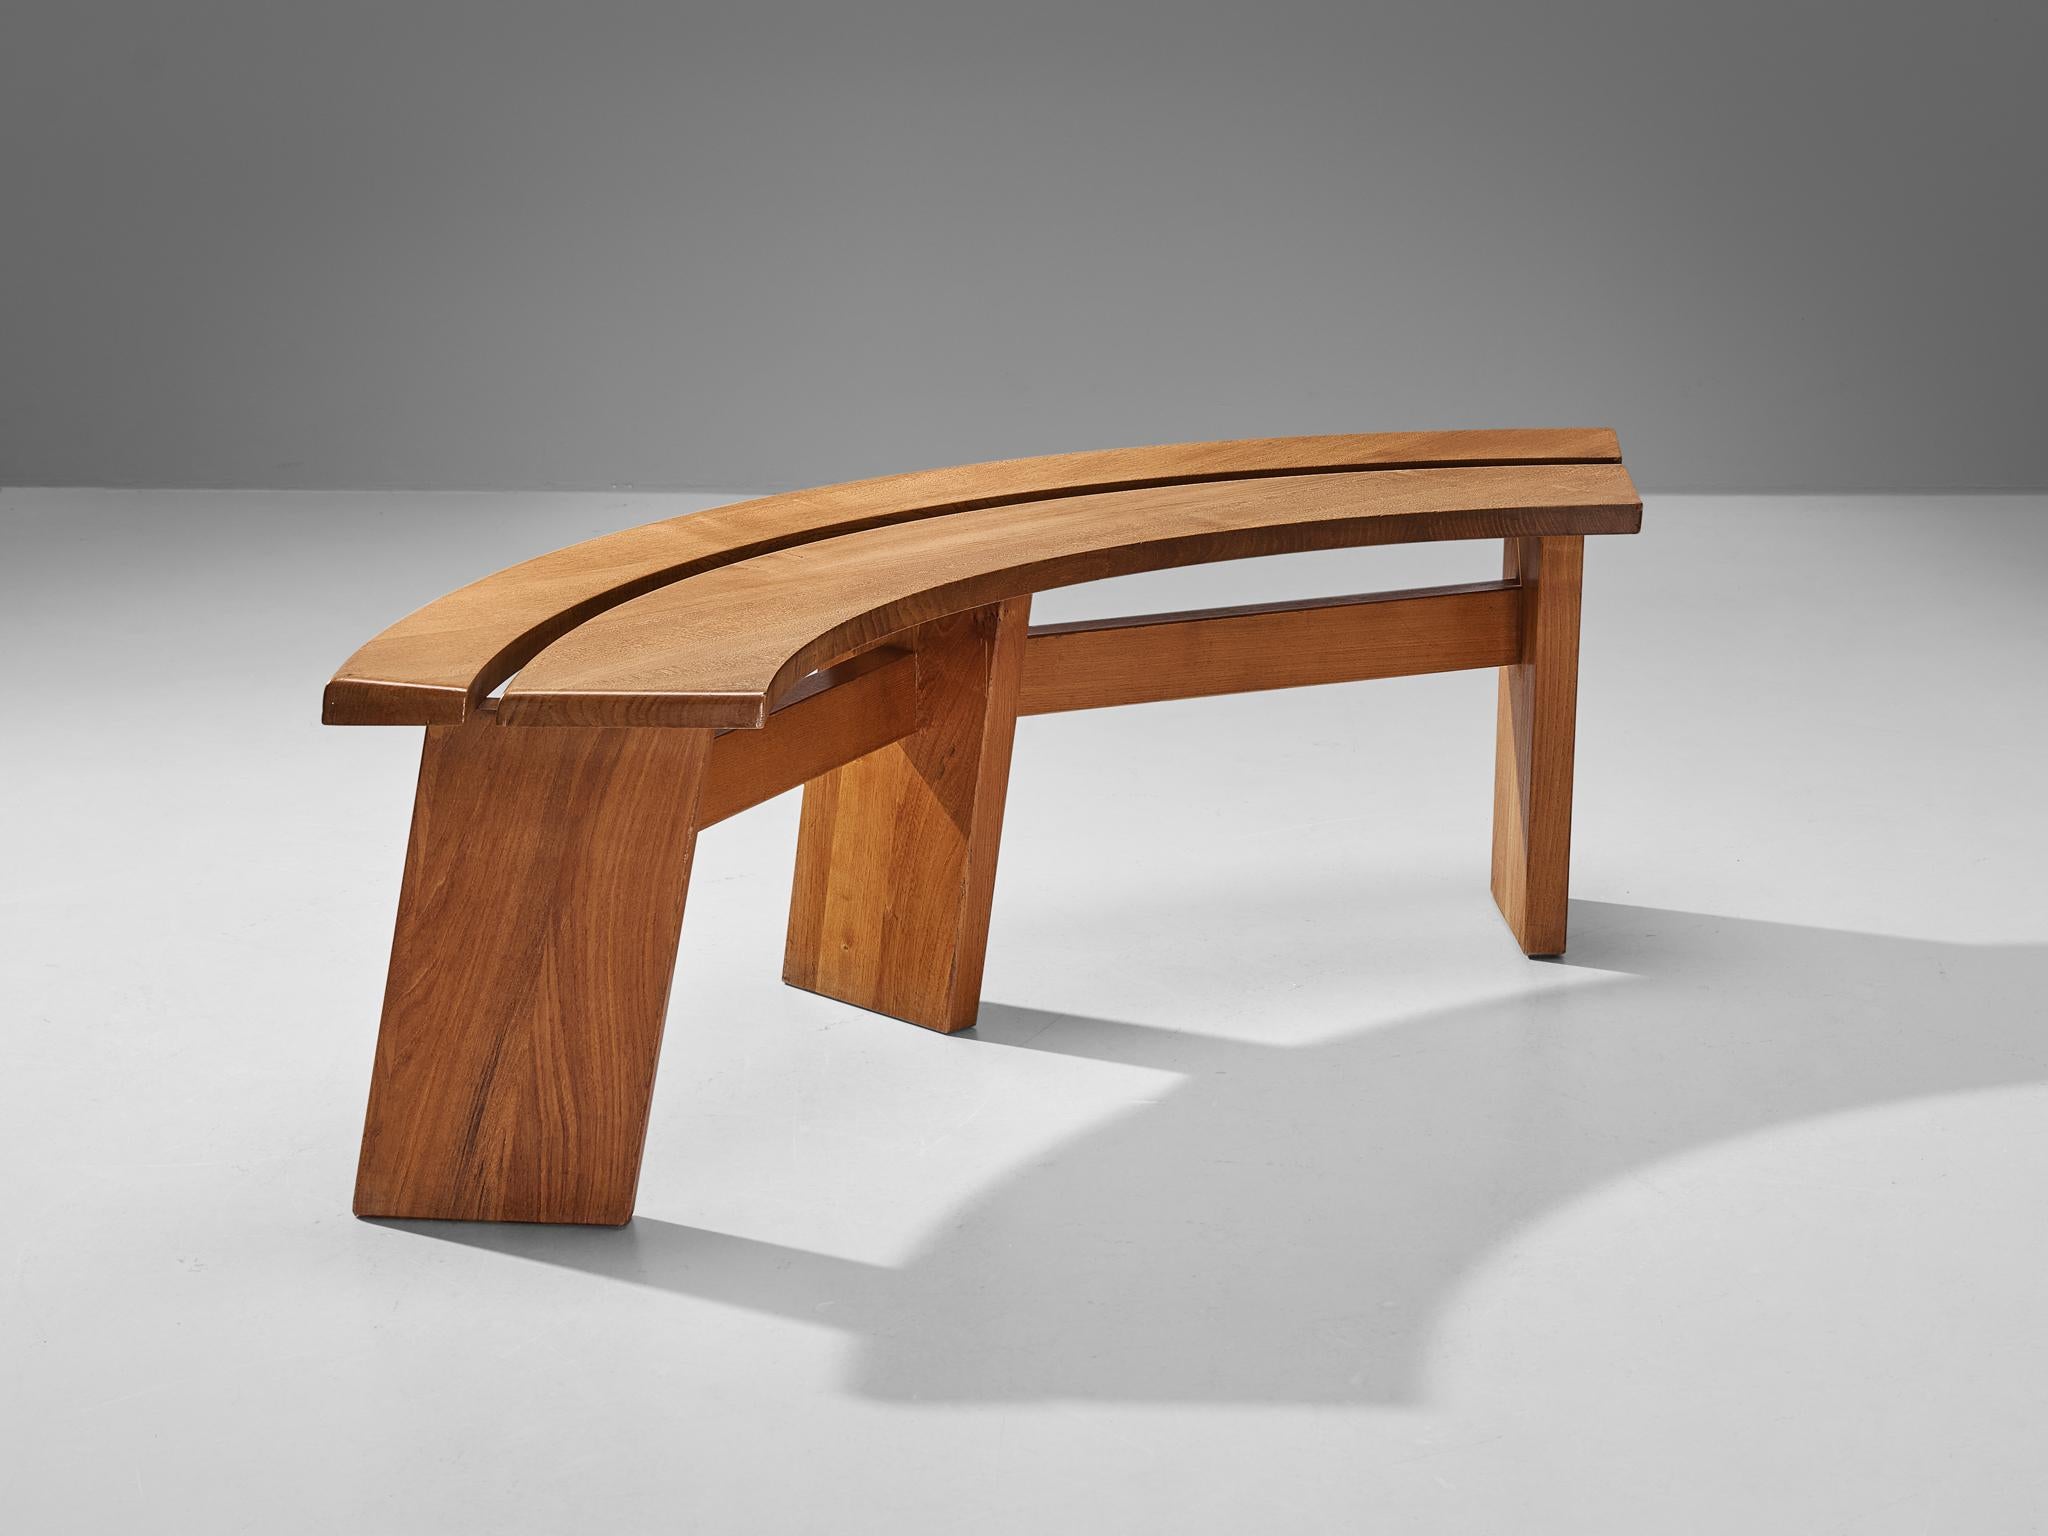 Pierre Chapo, bench, model 'S38A', elm, France, 1960s.

This wonderful ‘S38A’ bench is designed by Pierre Chapo in the 1960s. A soft, warm all-over patina is visible on the wood of this bench. This emphasizes the natural expression of the item. This